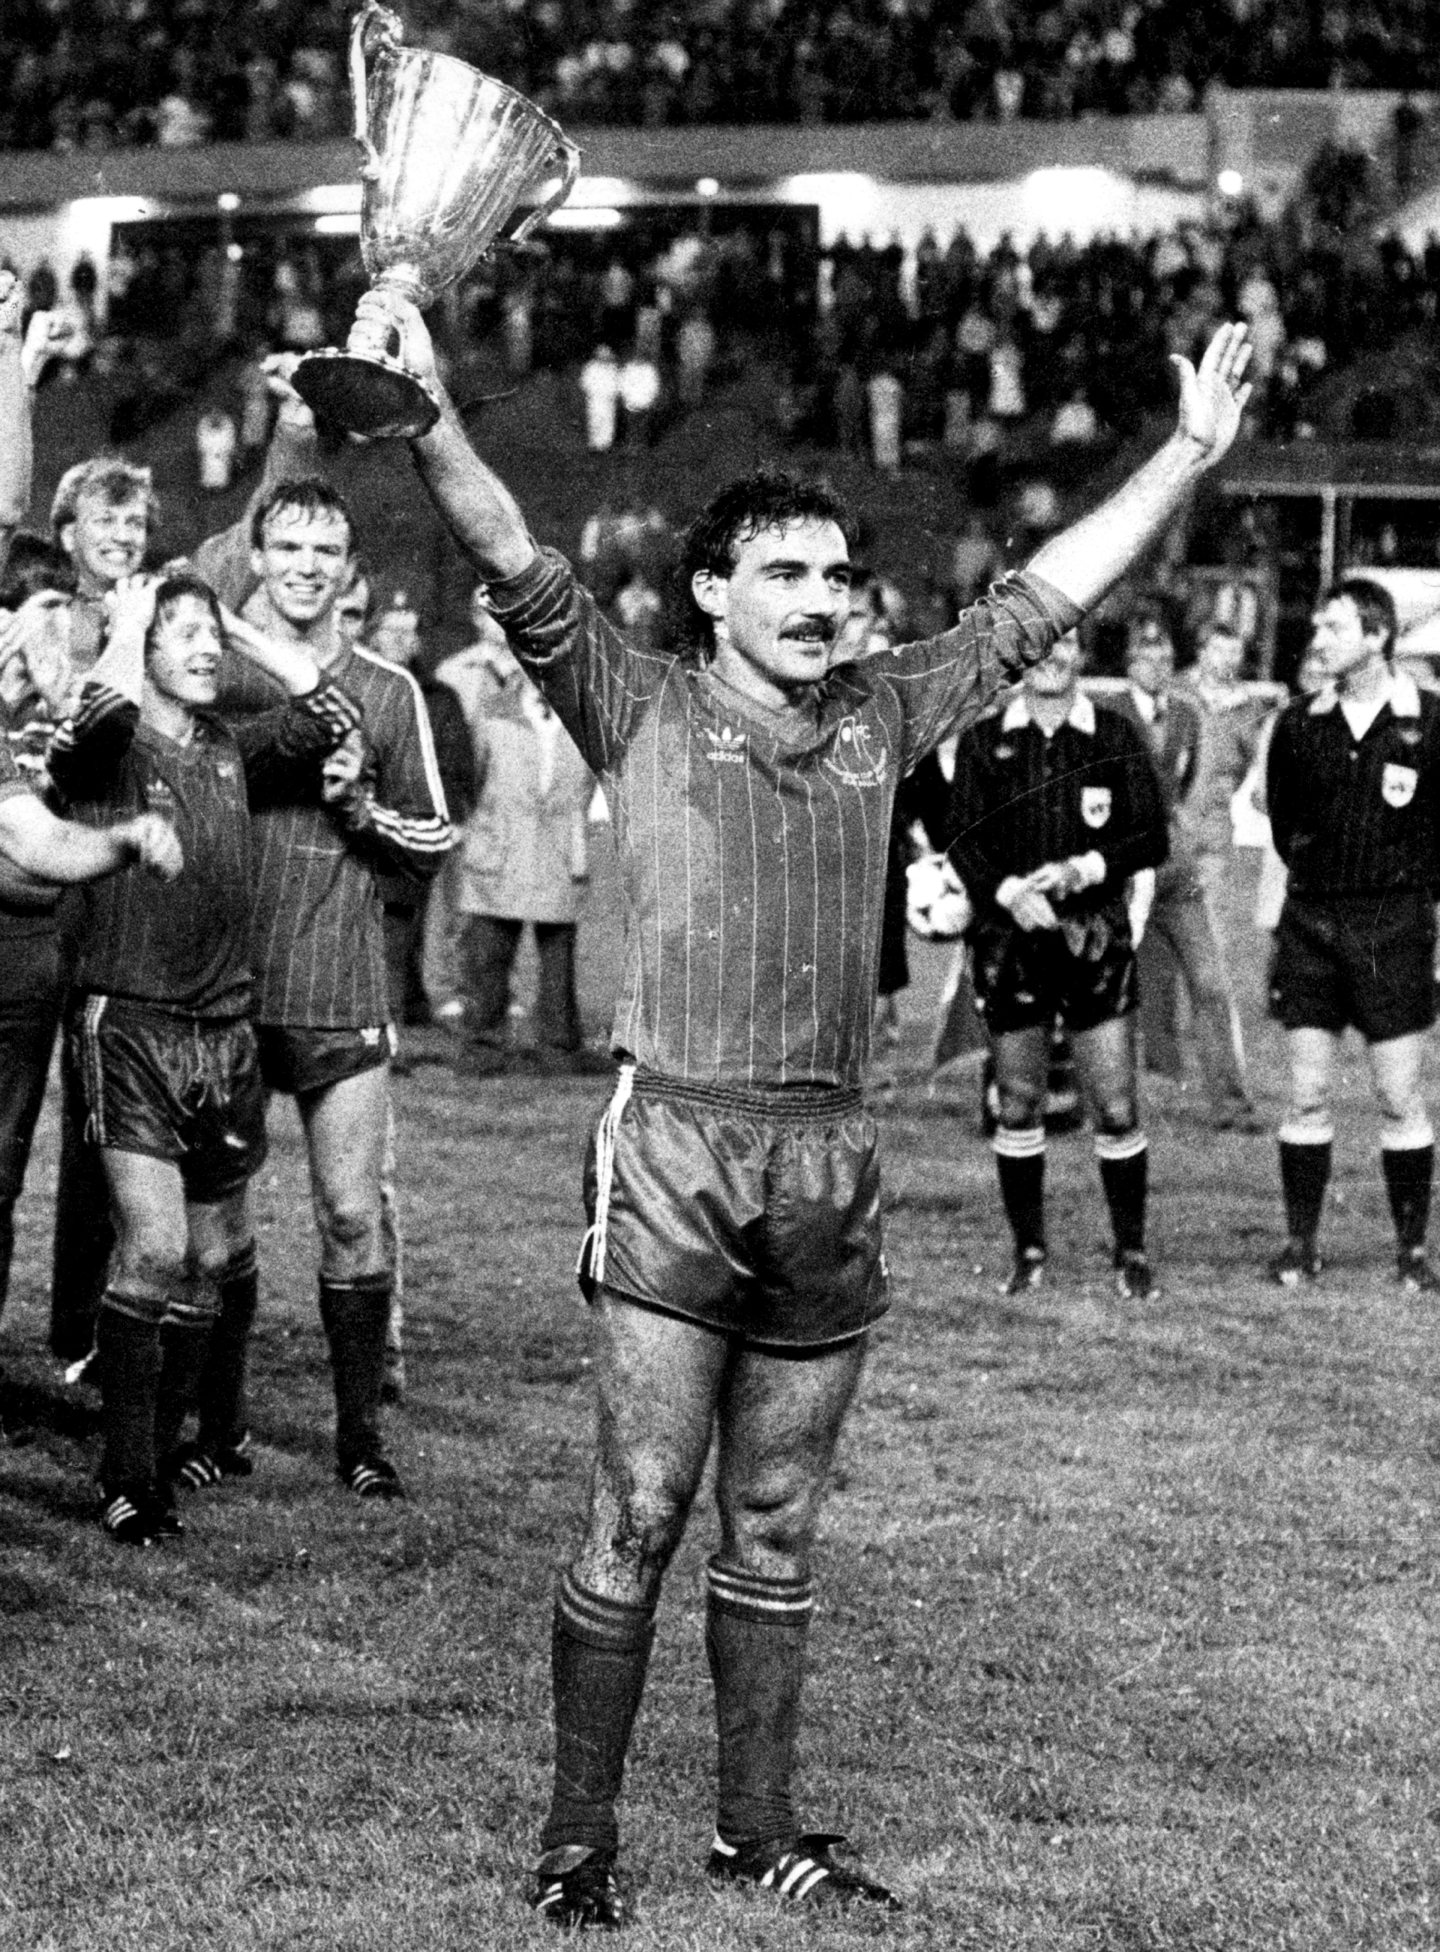 Who could forget this famous image from 1983 of Willie Miller celebrating? Image: DC Thomson.